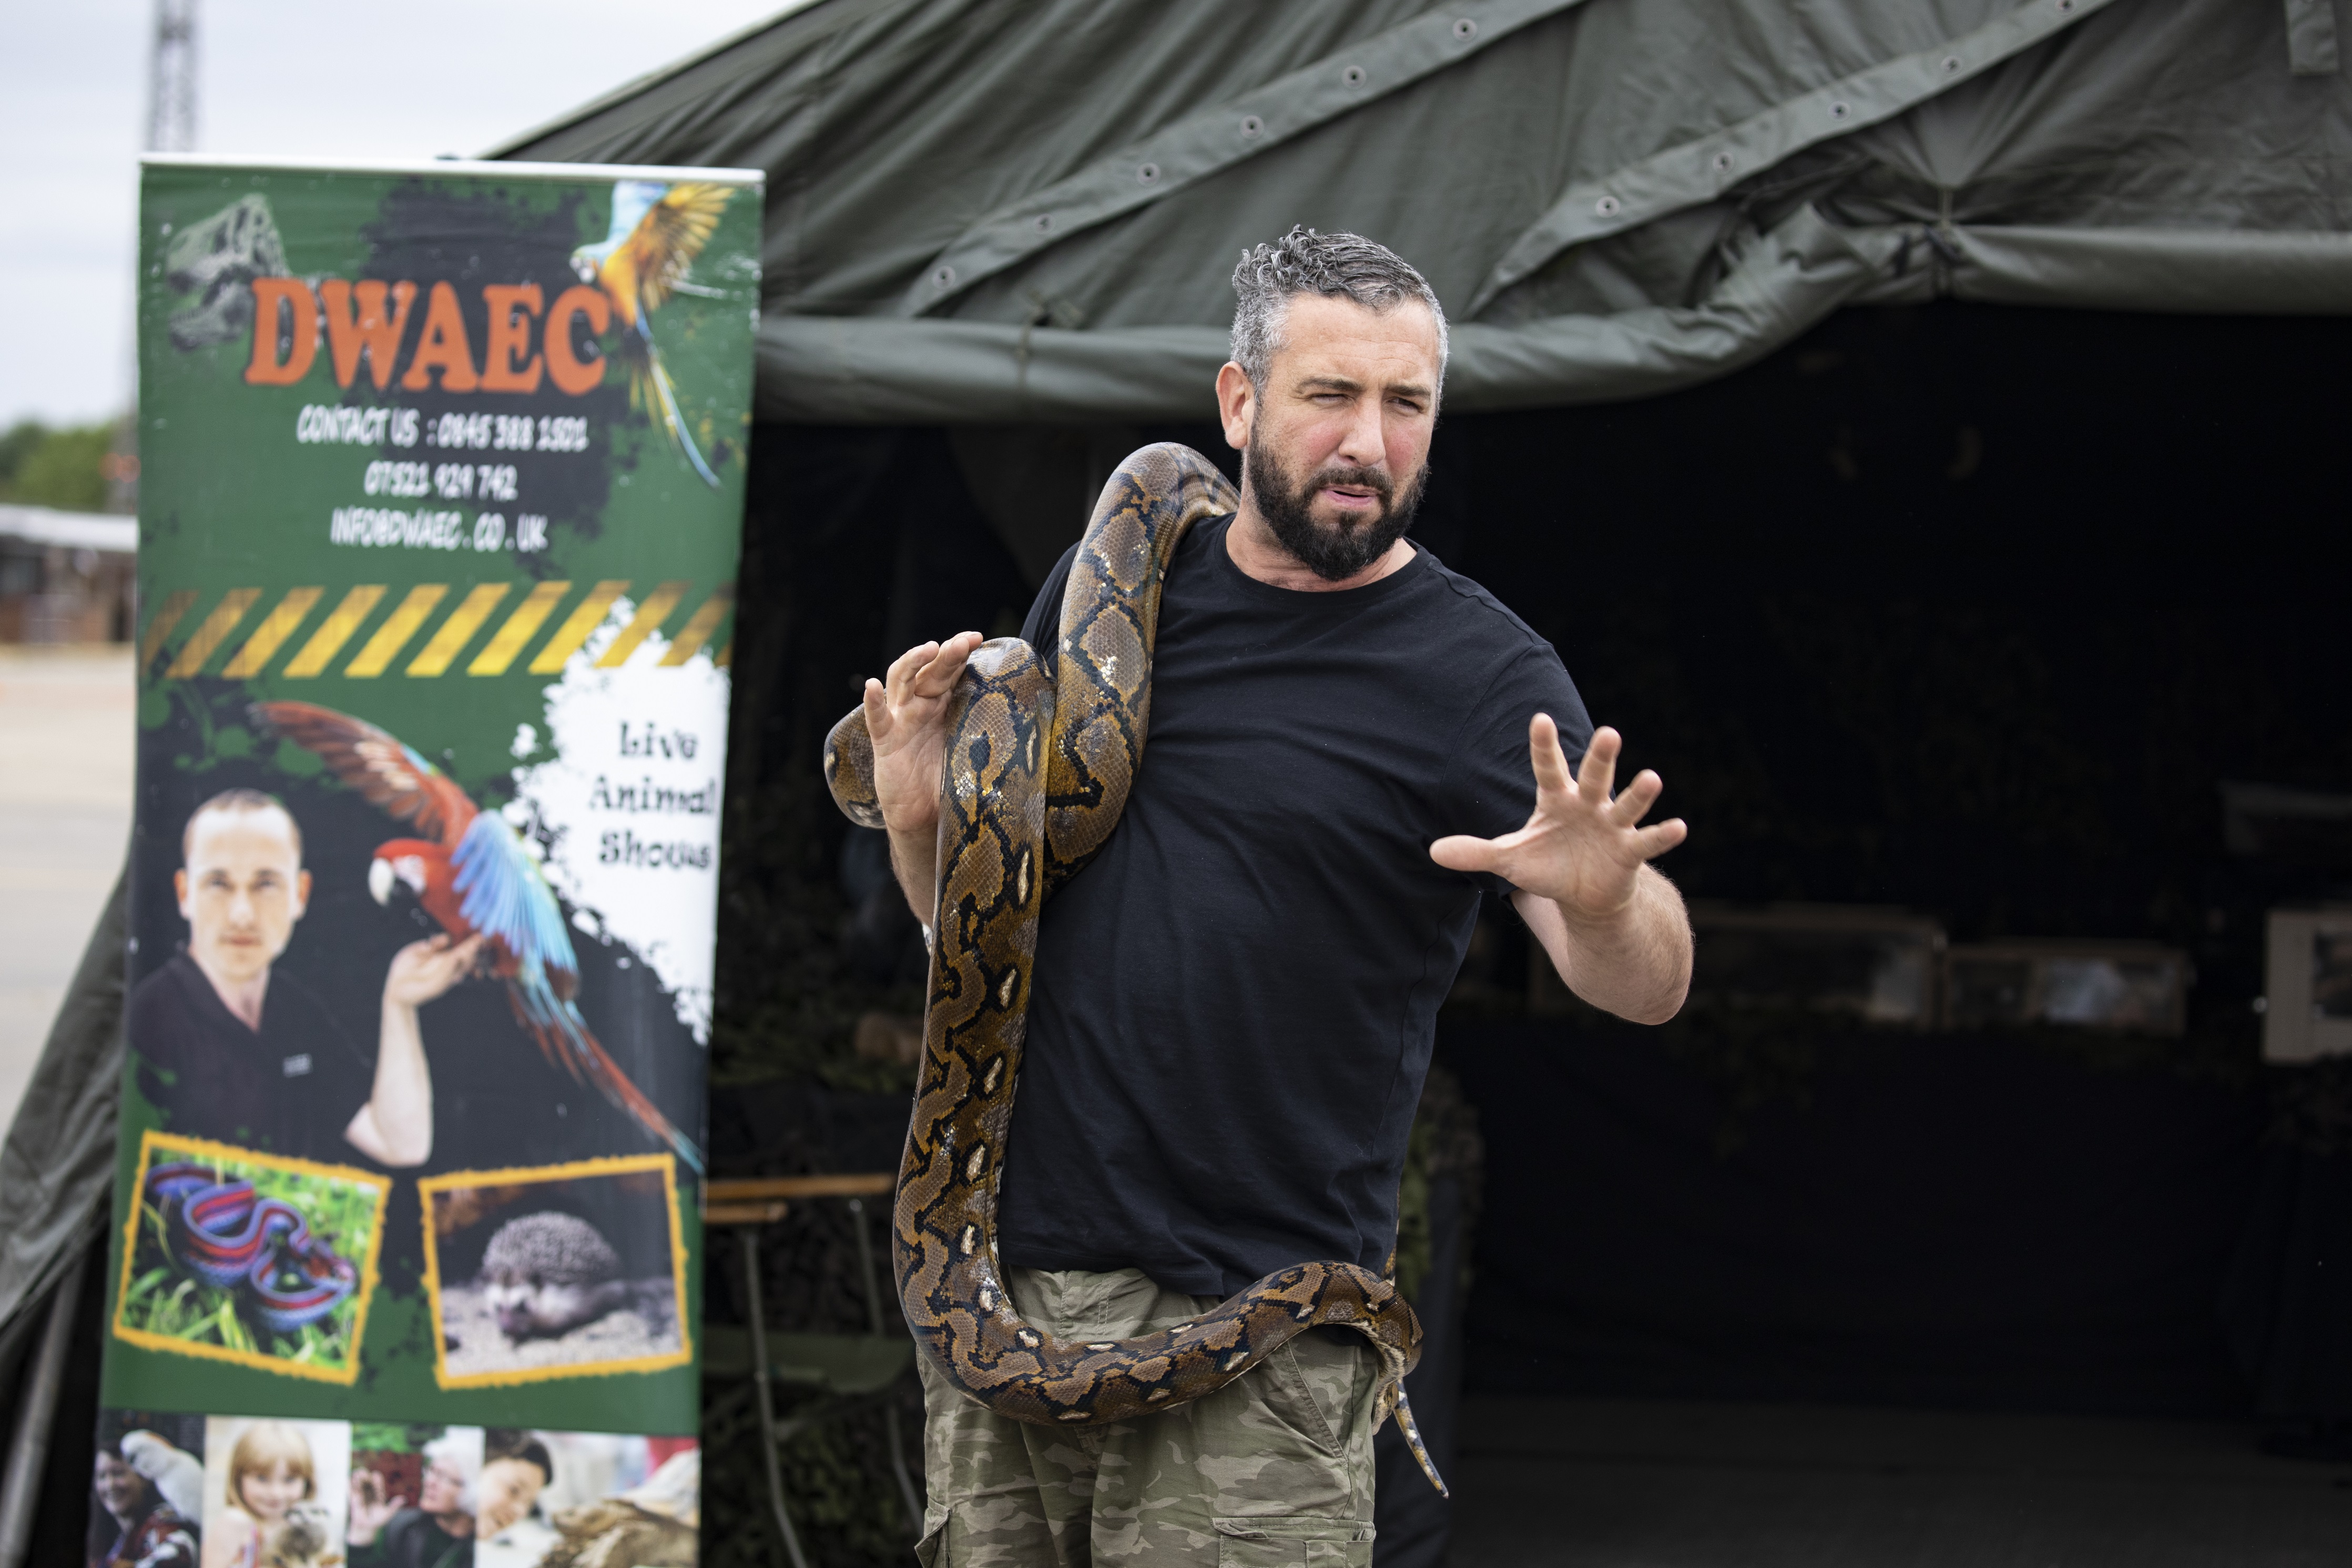 Wildlife demonstrations by education company DWAEC